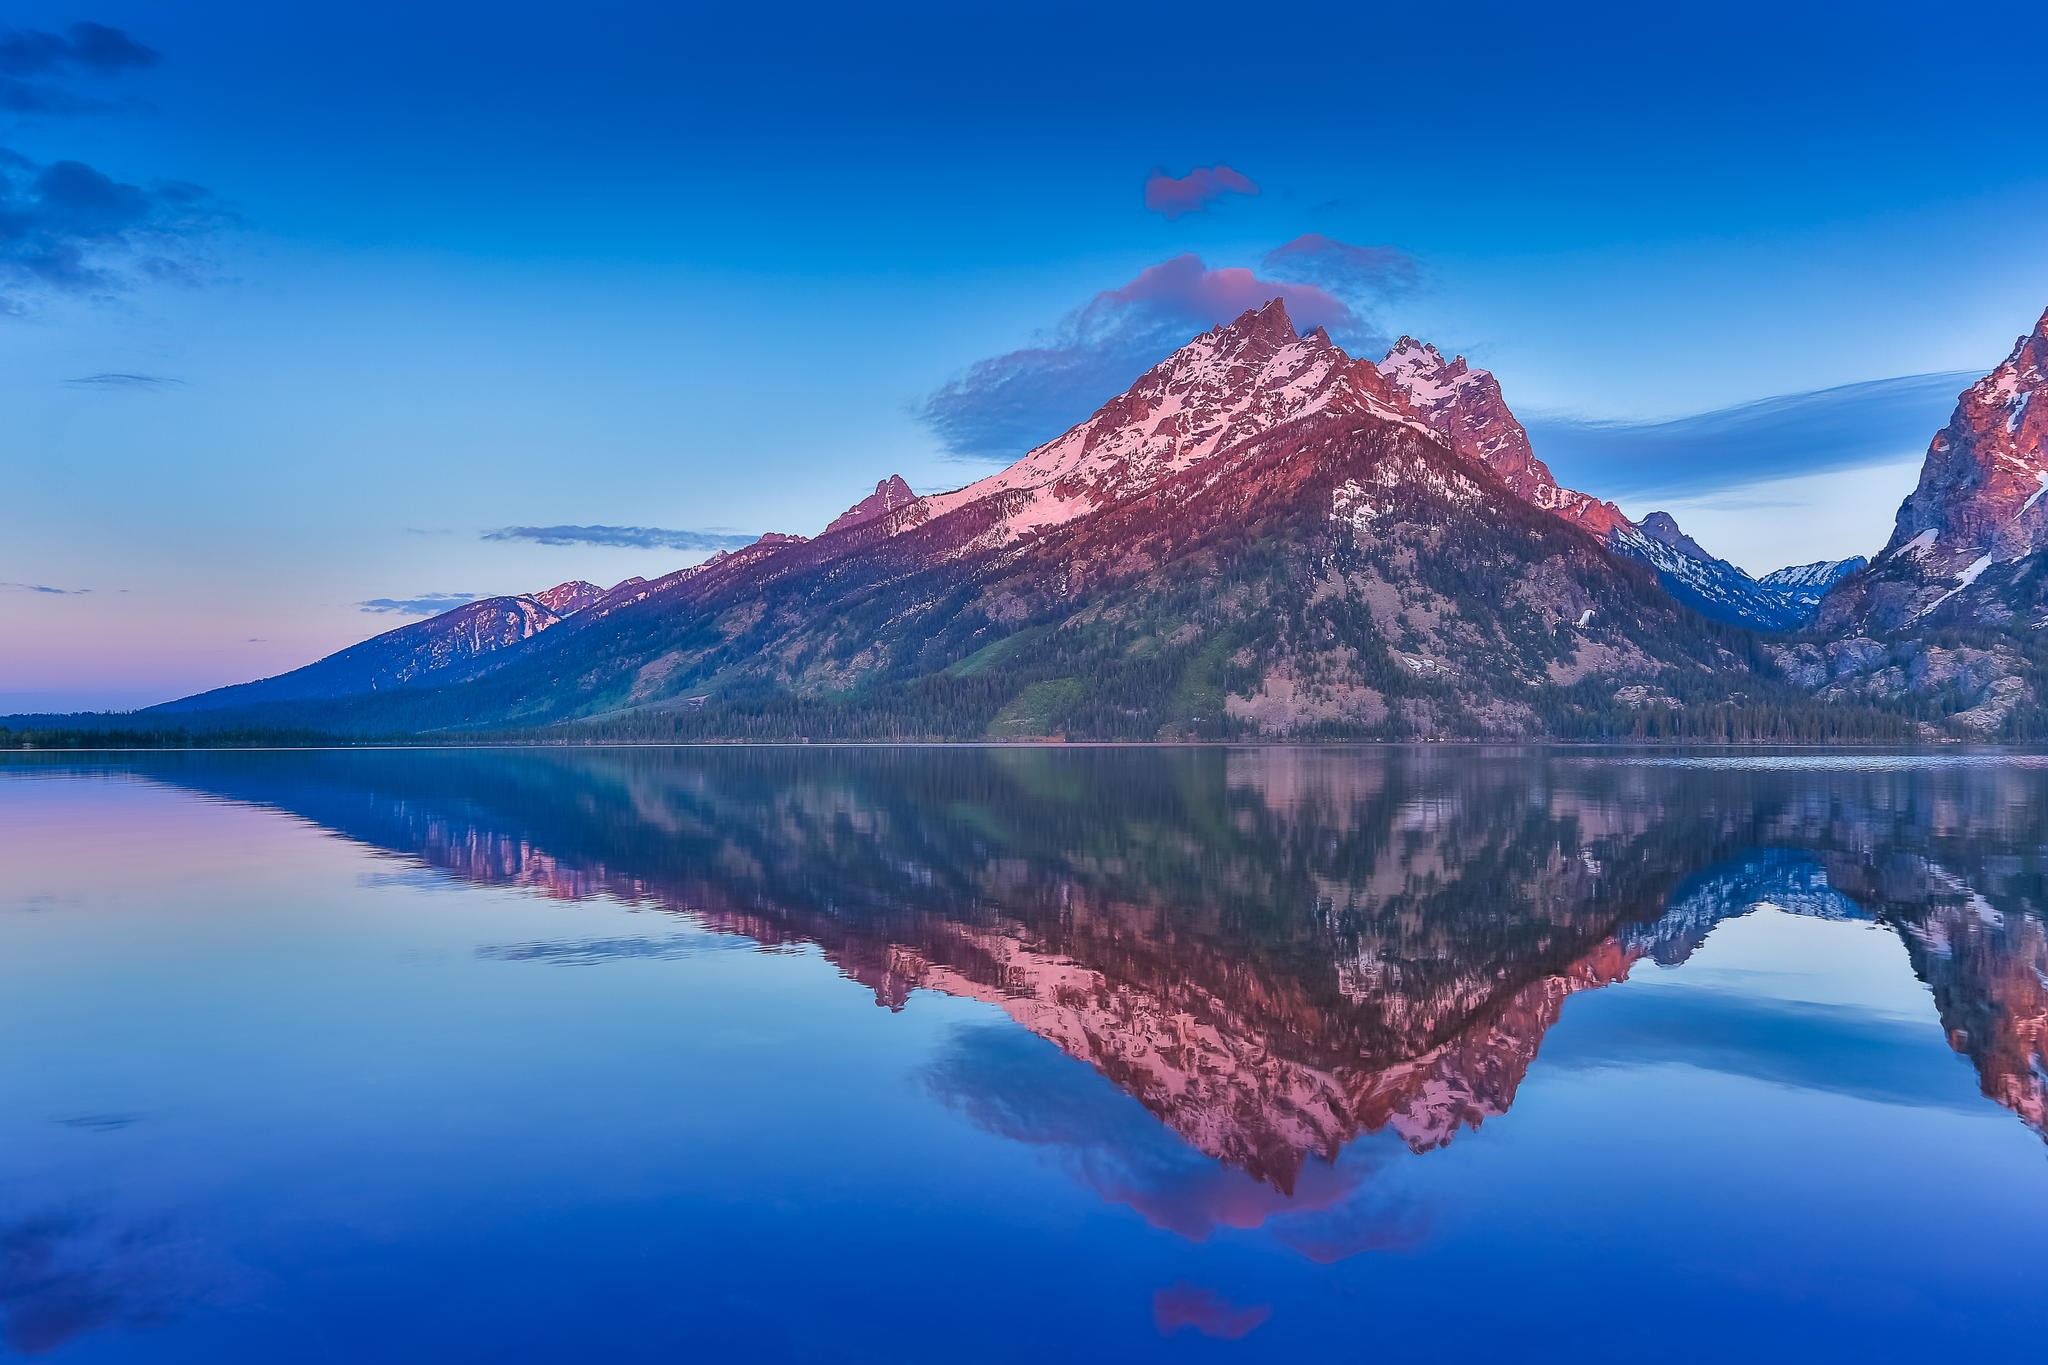 General 2048x1365 mountains lake reflection snowy peak water blue forest nature landscape